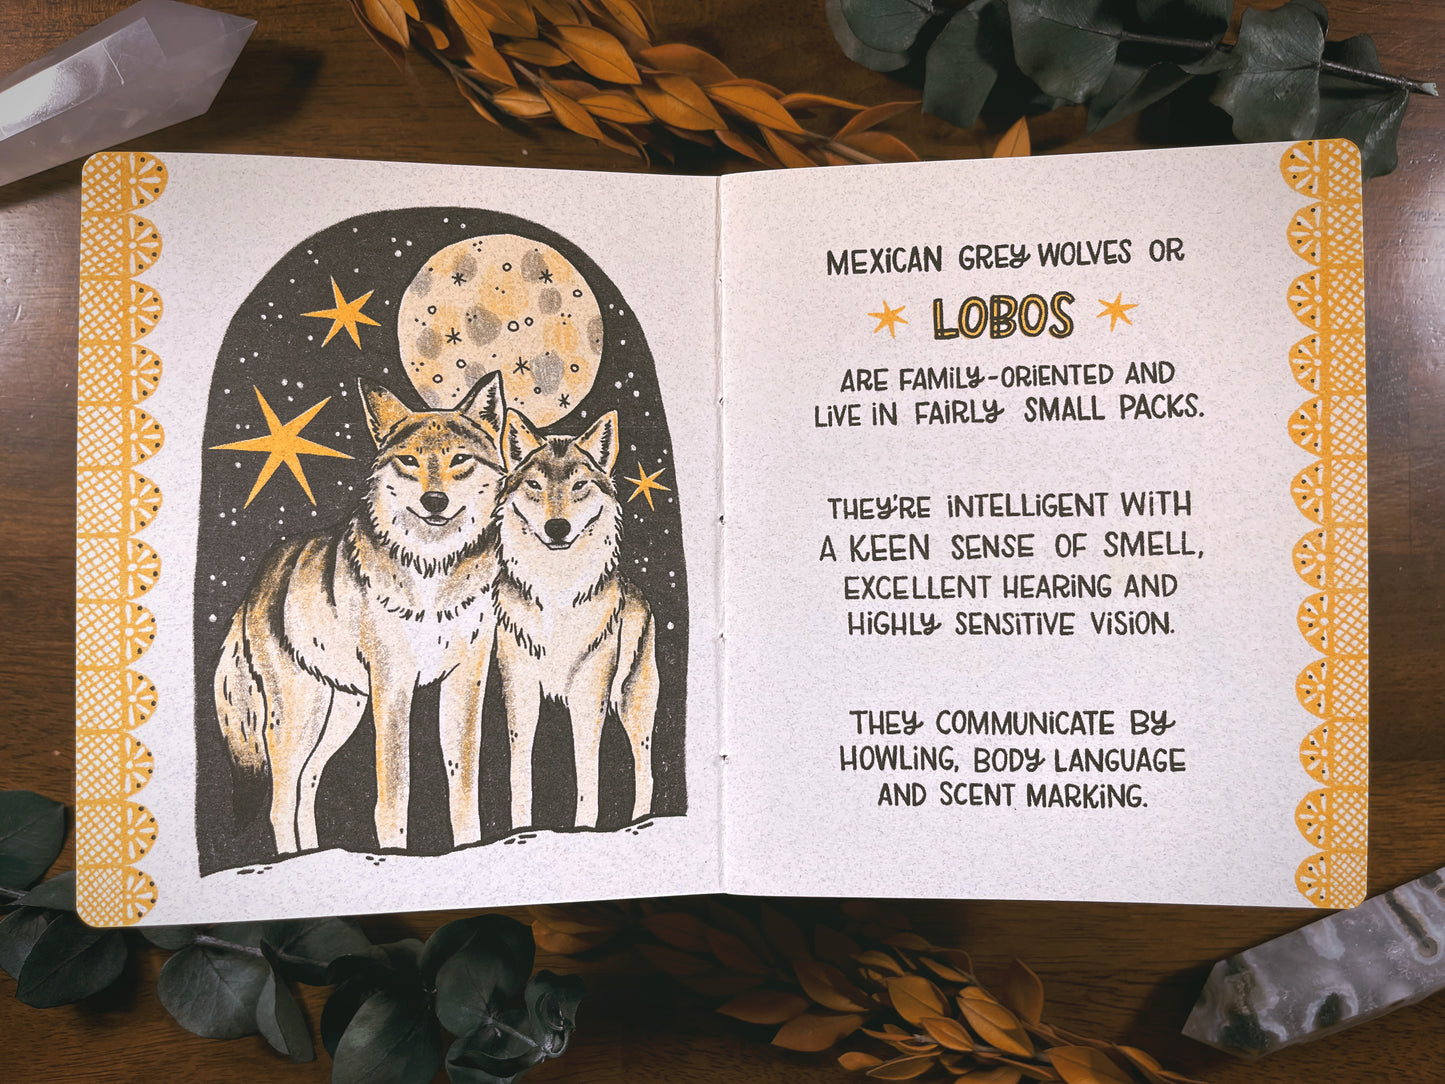 Mexican Grey Wolf Conservation Zine